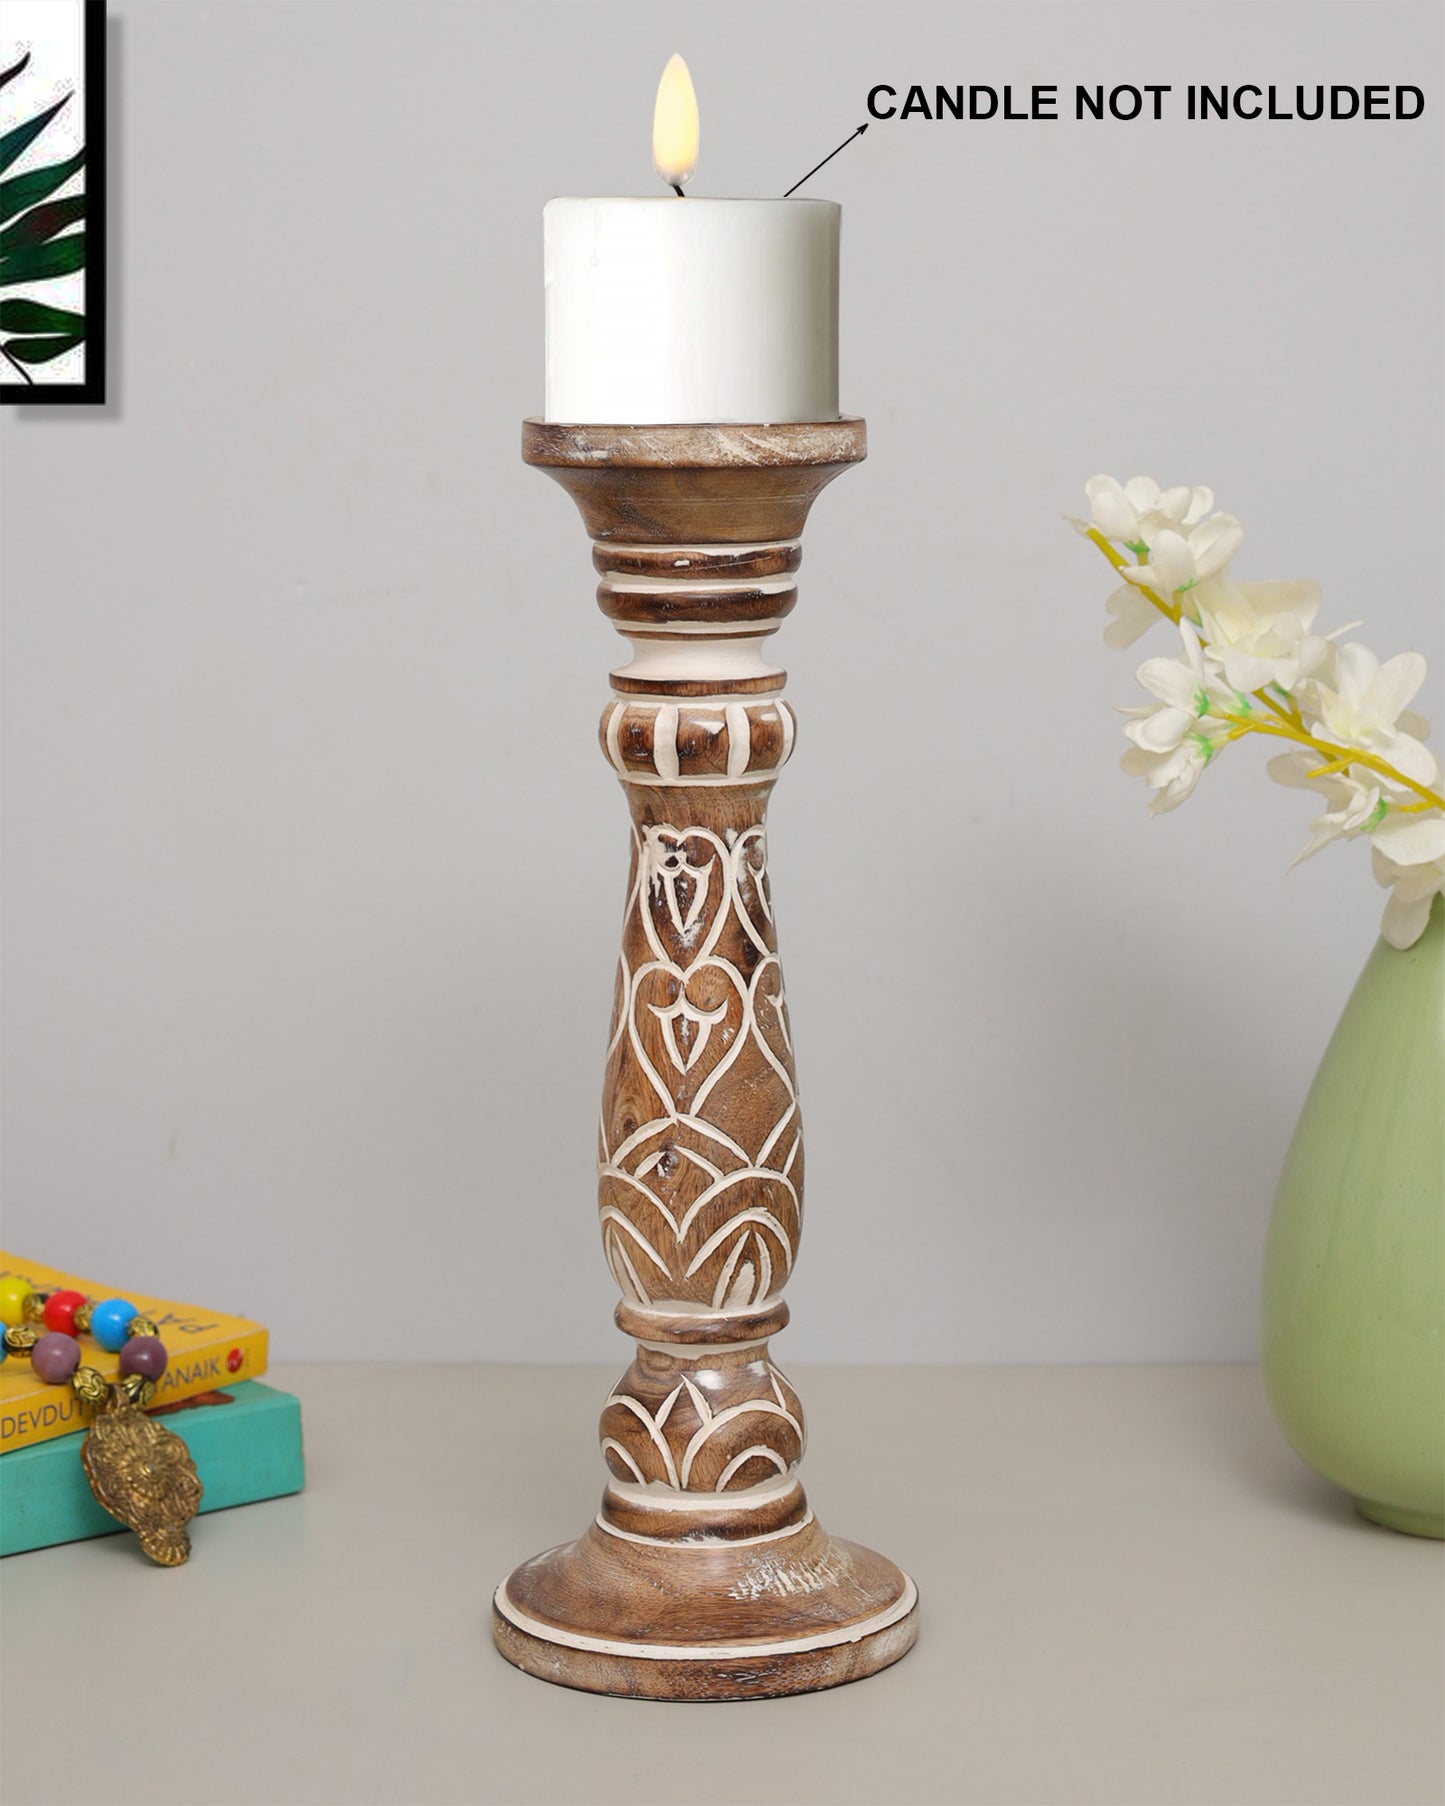 Wooden Pillar Candle Stand, Hand Crafted Wood Candle Holders for Living Room, Table Centerpiece, Hallway Decor Polish, Antique White